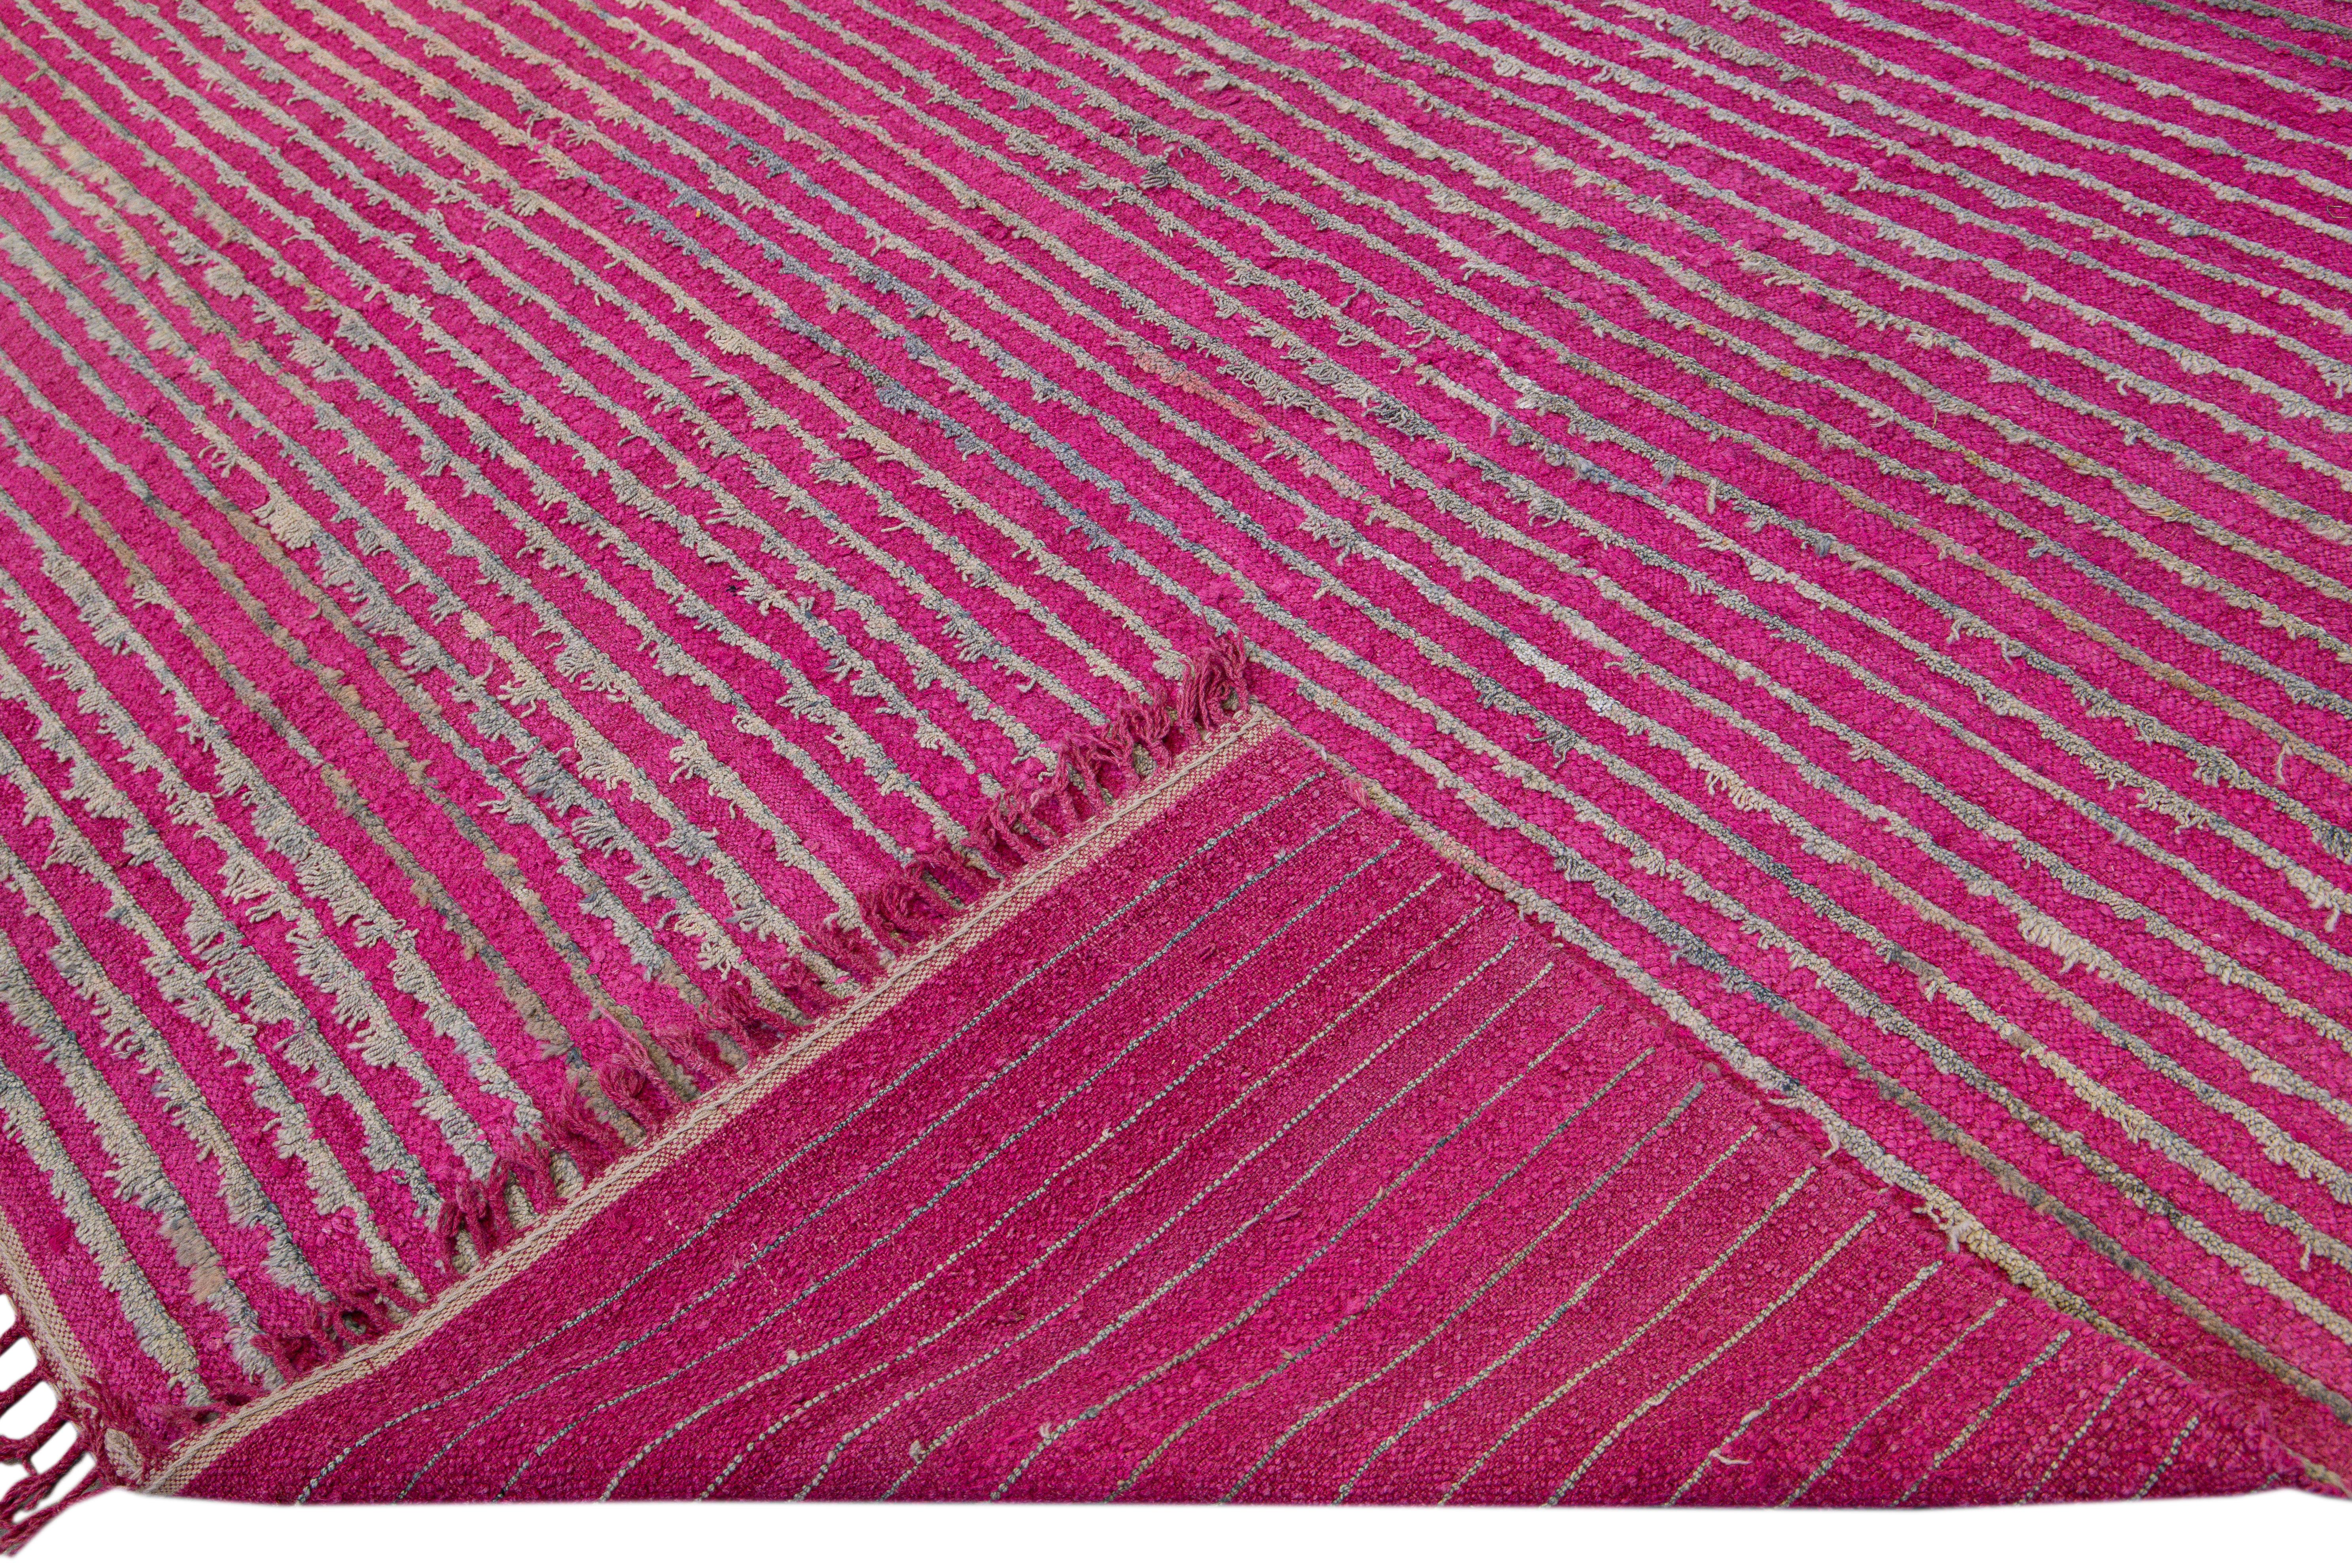 Beautiful vintage Tulu flatweave wool rug with a pink field. This Turkish rug has gray accents gorgeous all-over striped pattern design.

This rug measures: 8'9